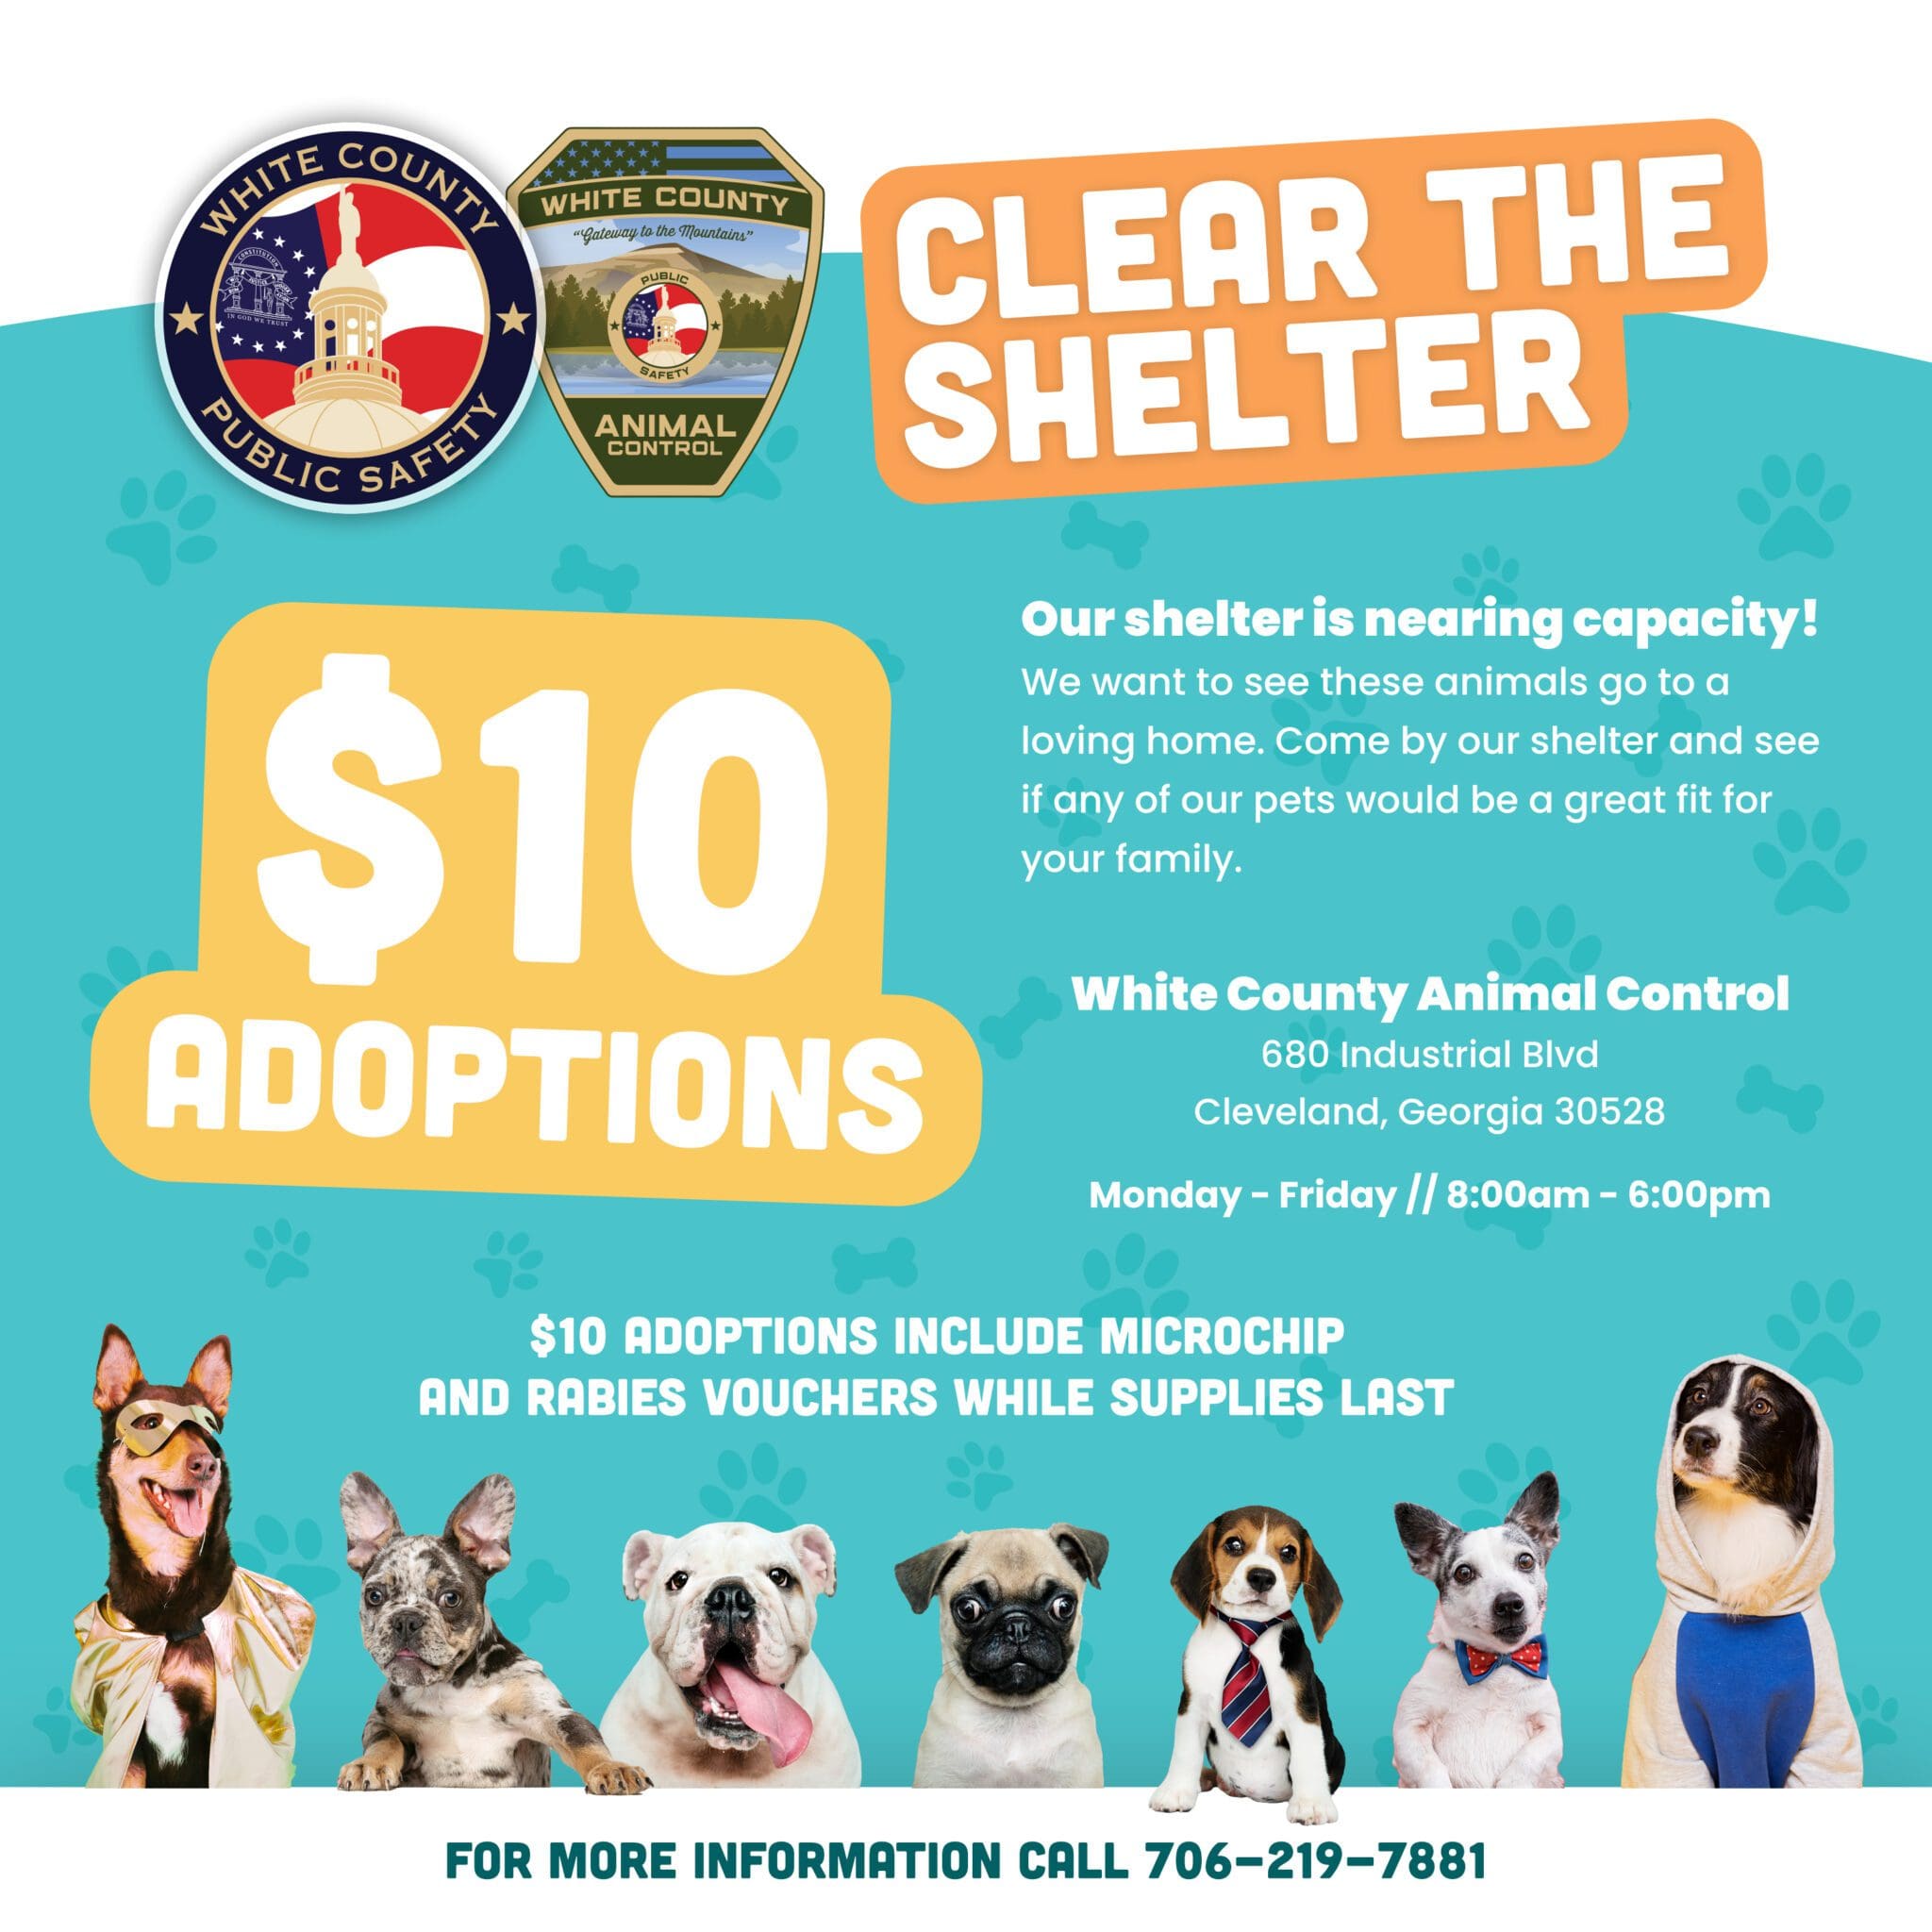 White County "Clear The Shelter" Event 10 Adoptions WRWH